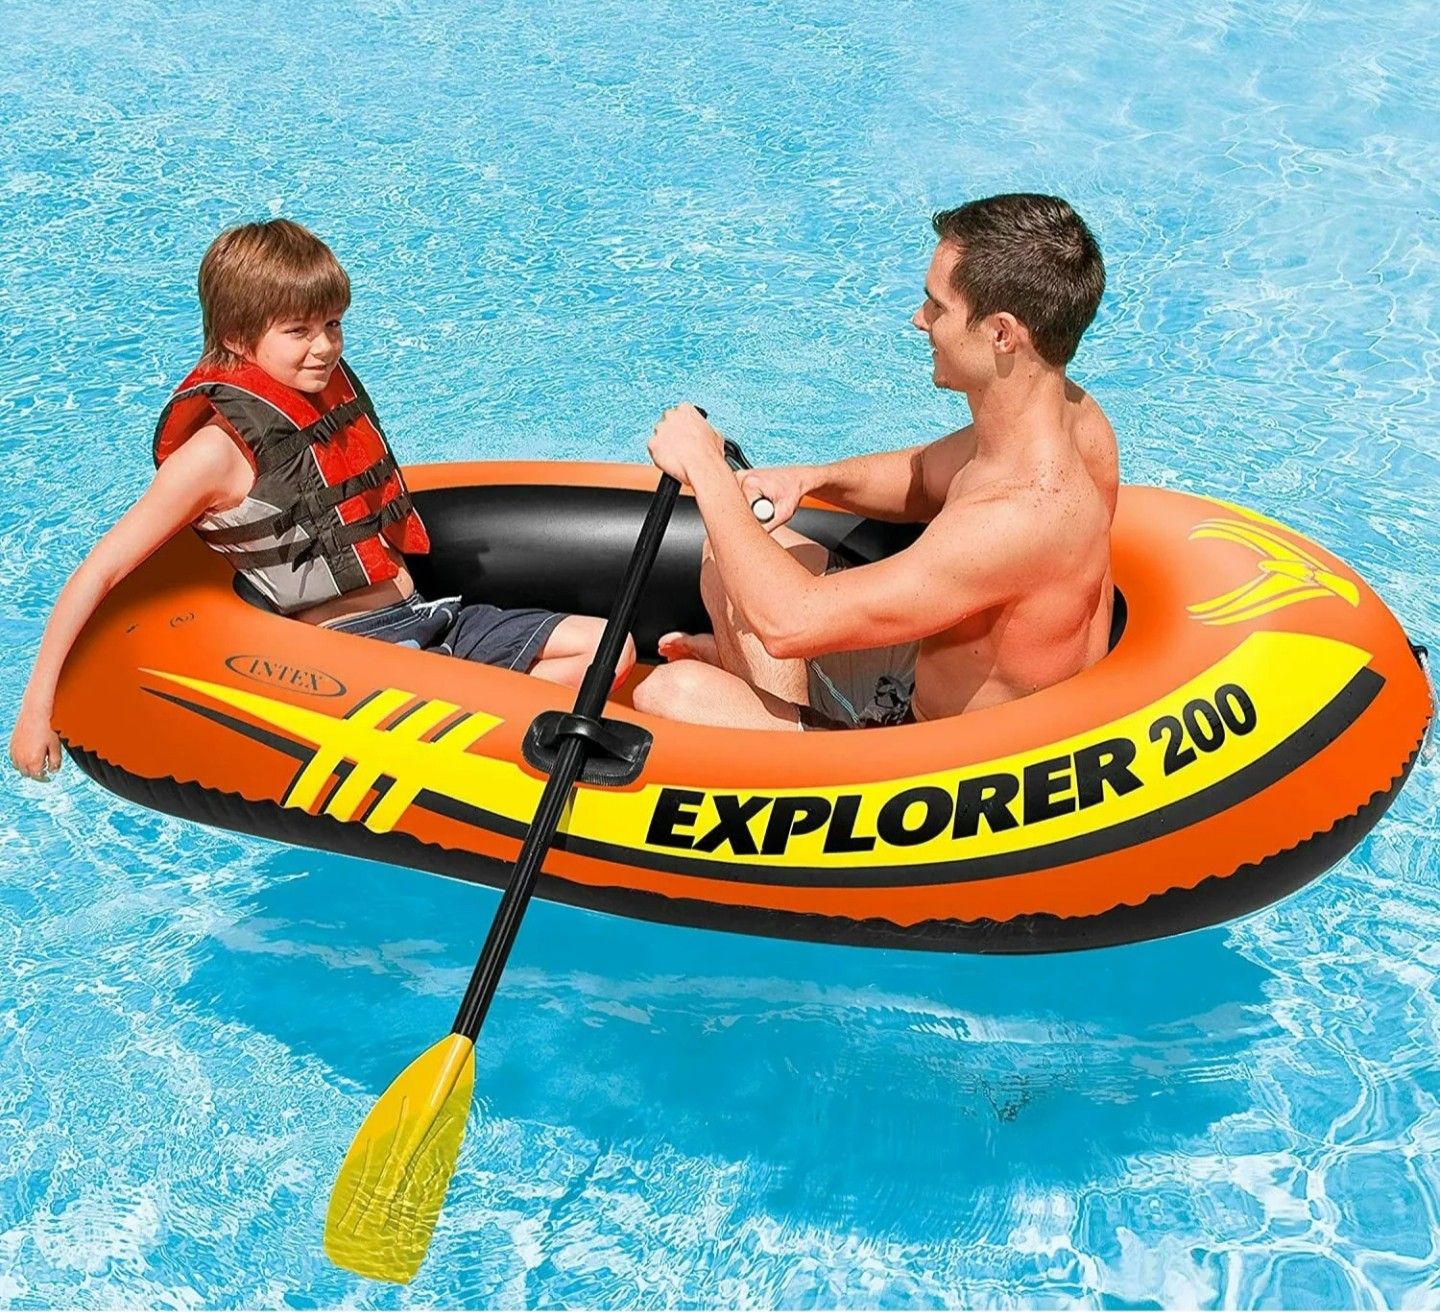 Pls READ* NEW IN BOX, 2 PERSON BOAT with paddles and pump